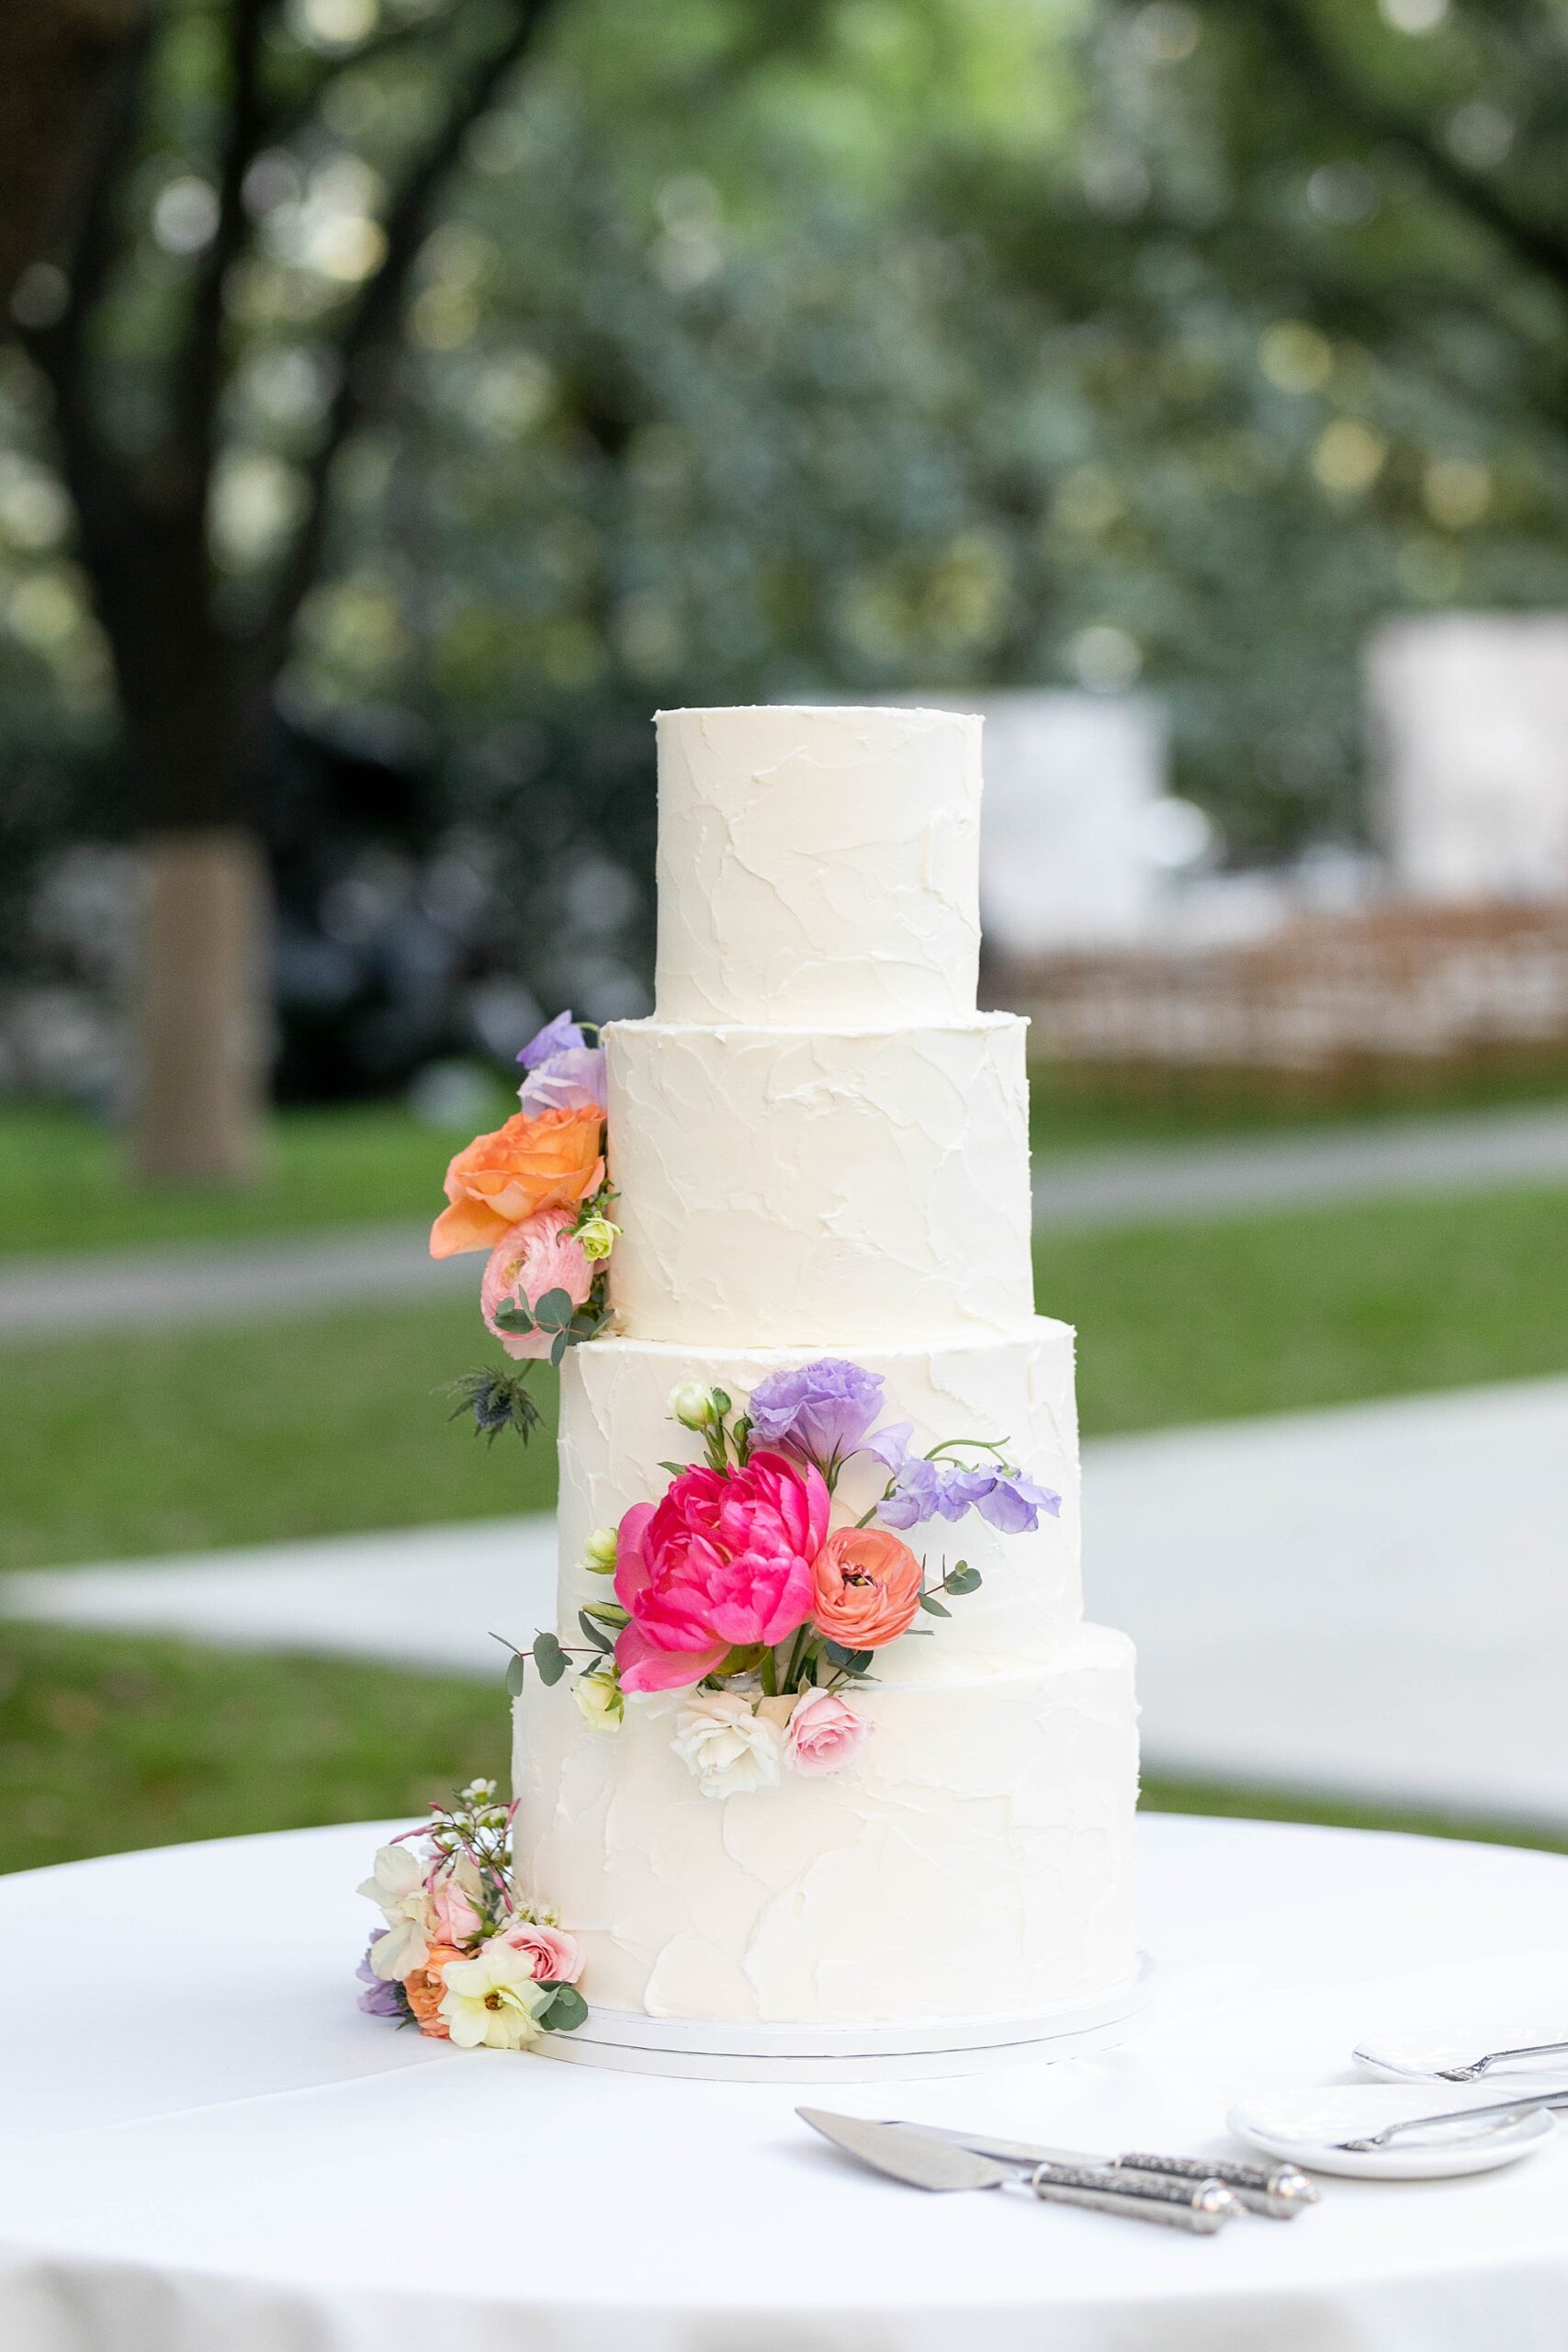 tiered wedding cake with bright flowers on side at al fresco wedding reception the Nasher Sculpture Center